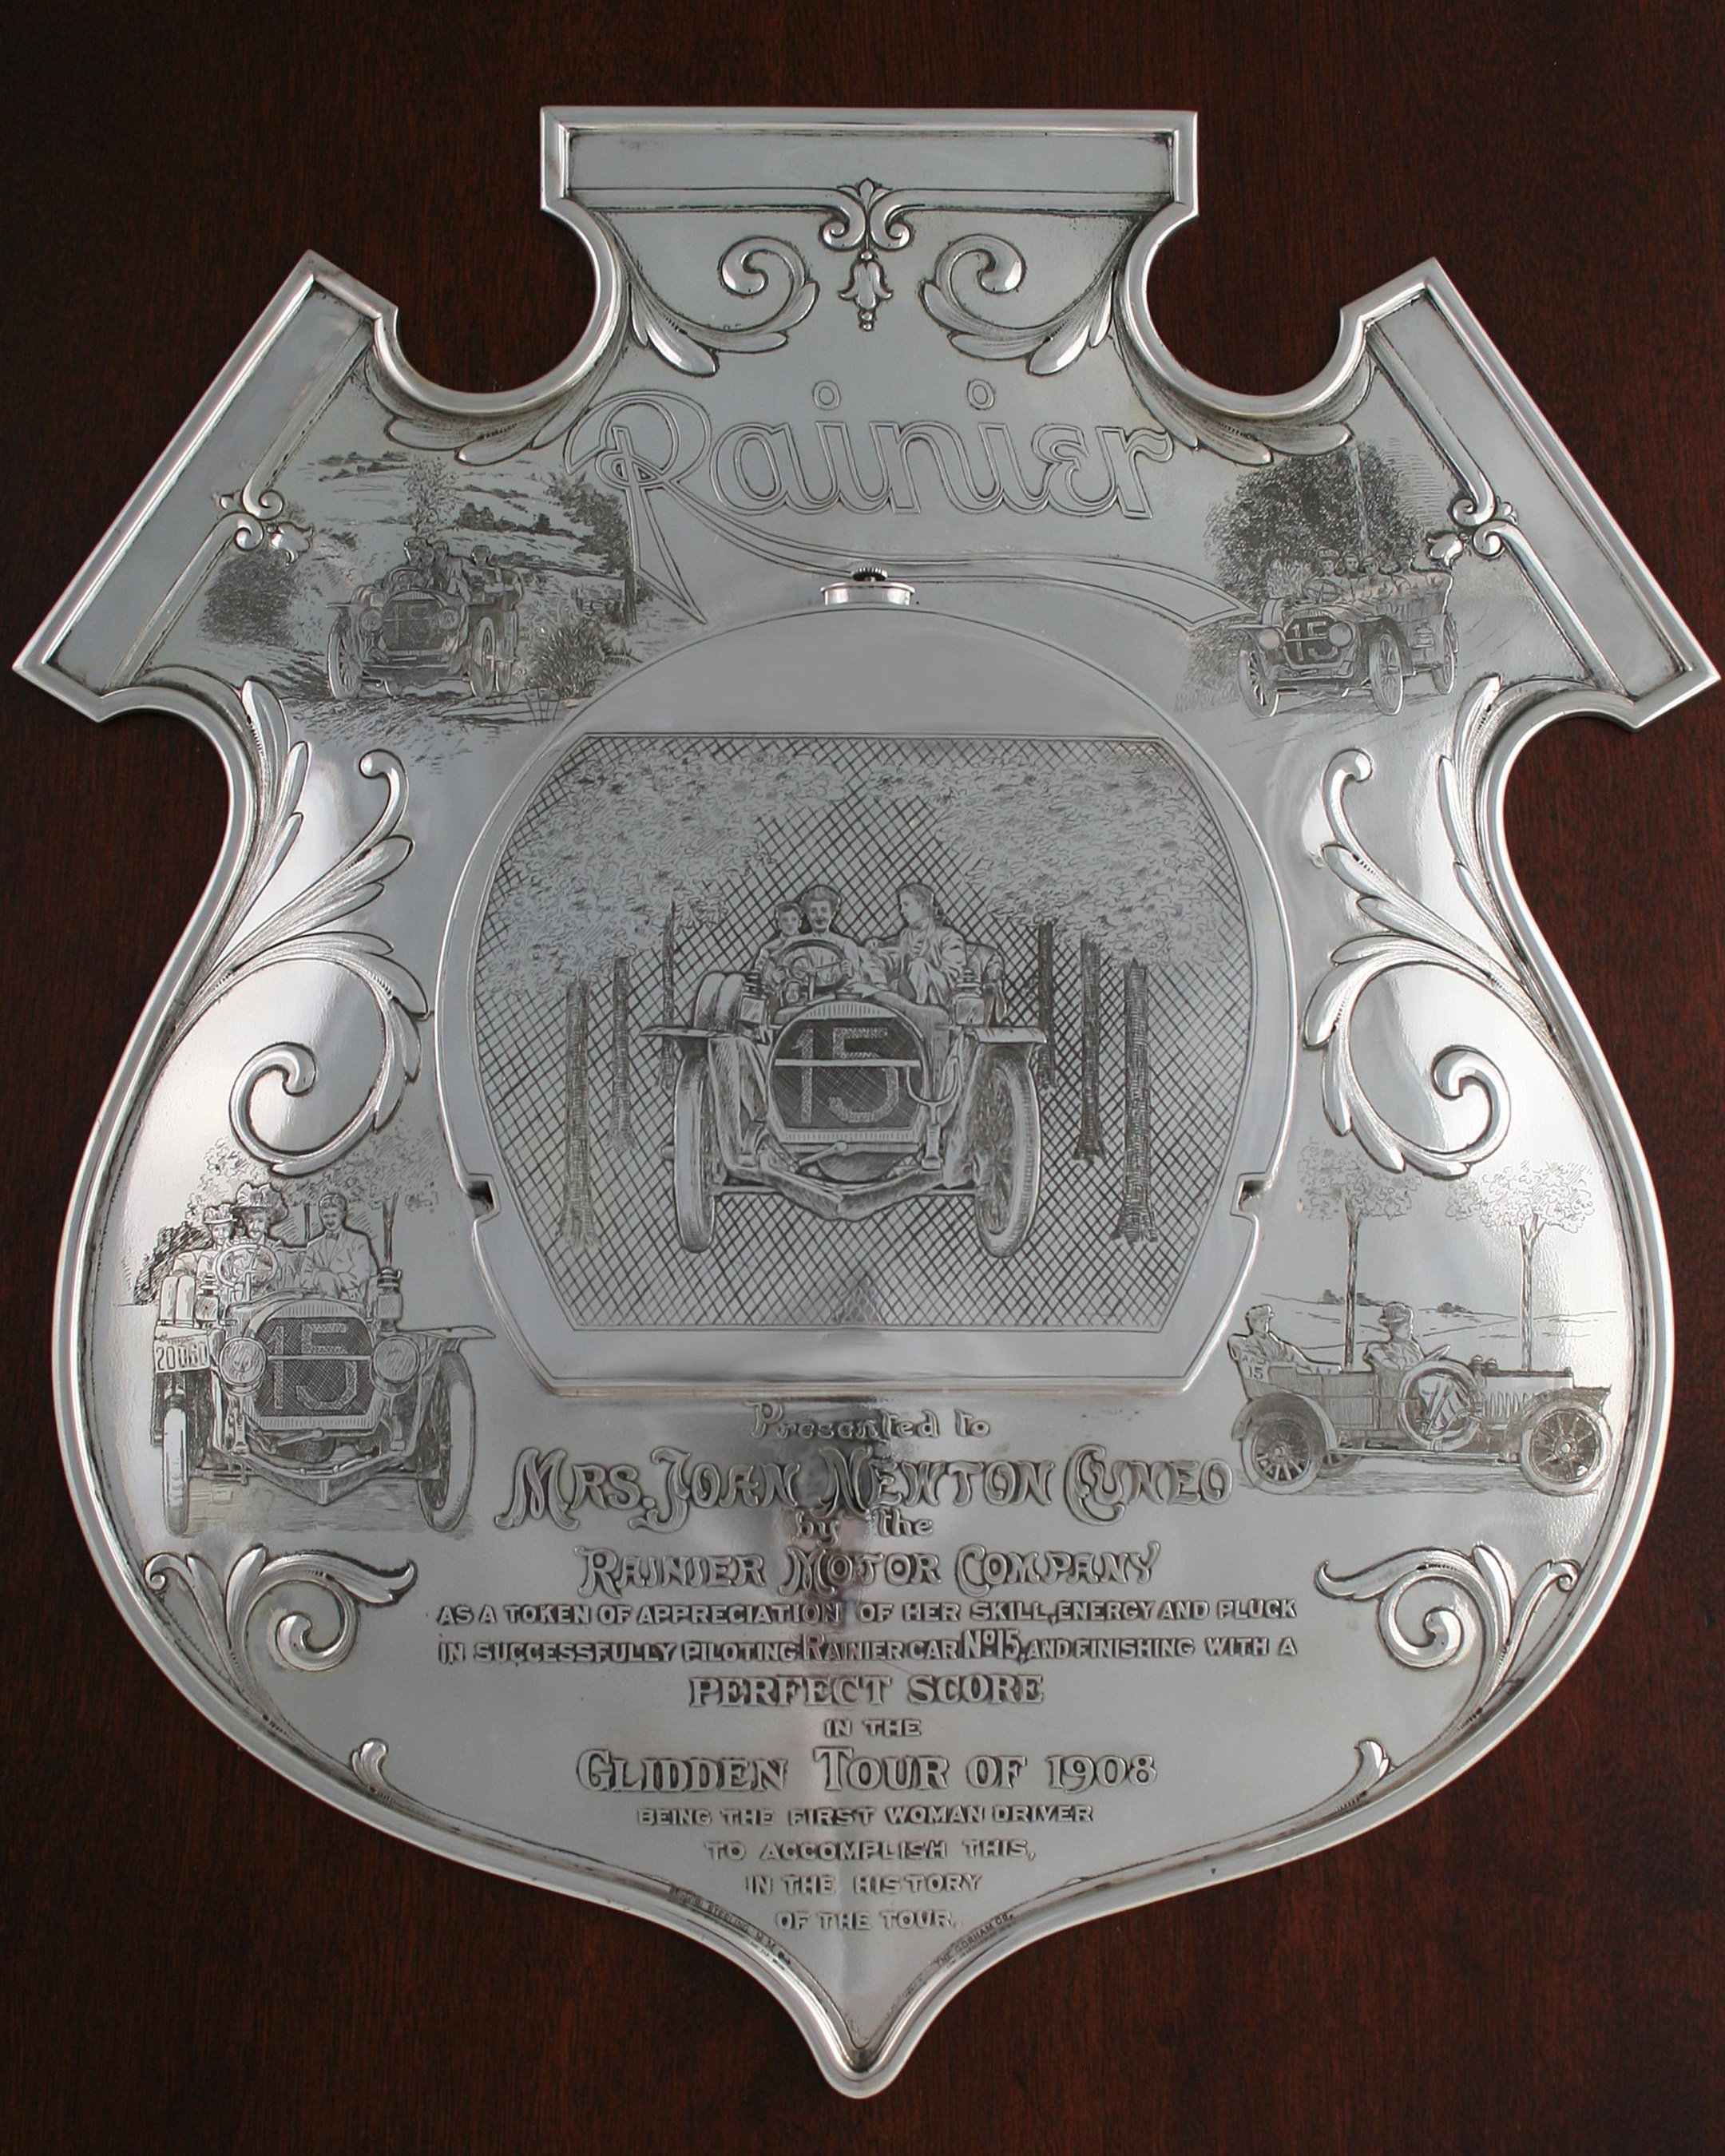 The Rainier Motor Company awarded this sterling silver plaque to driver Joan Newton Cuneo for achieving a perfect score in the 1908 Glidden Tour. The plaque, made by Gorham, is expected to sell for more than $40,000. MBA Seattle Auction House image